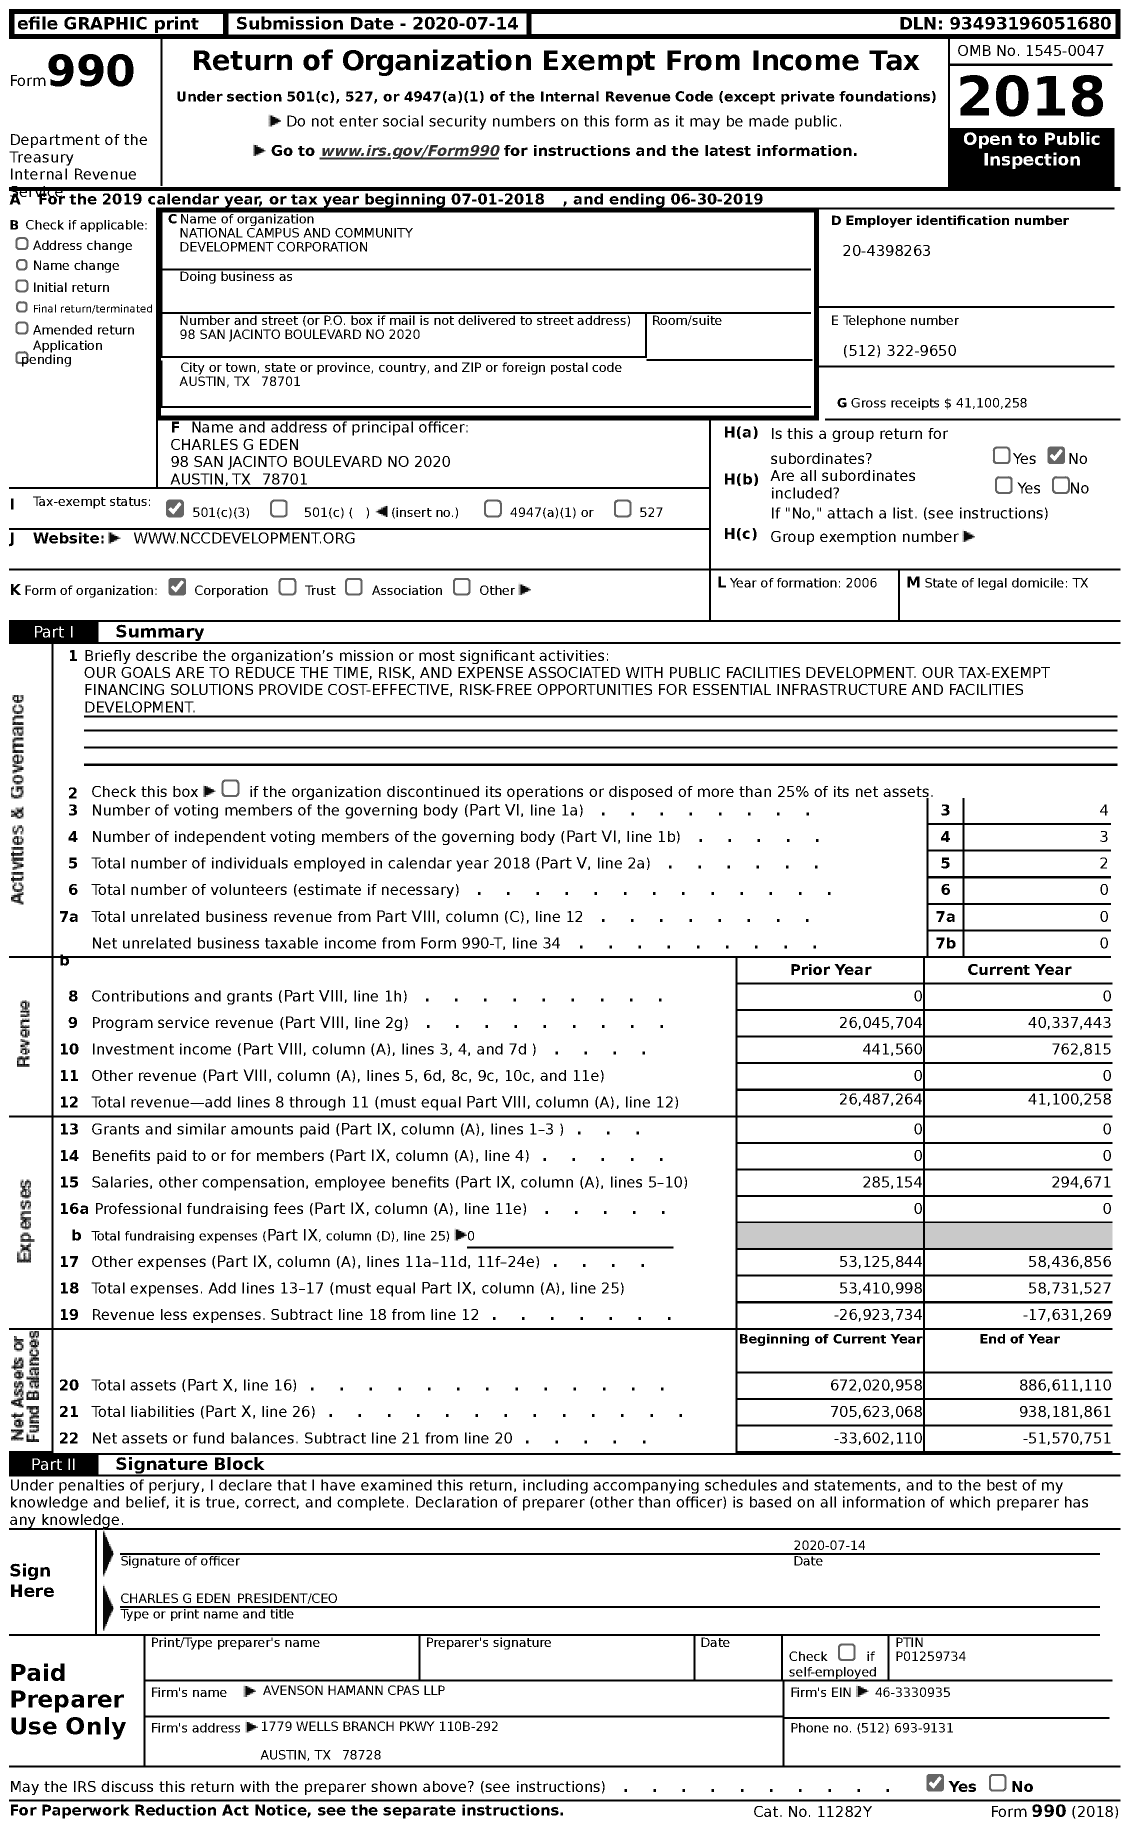 Image of first page of 2018 Form 990 for National Campus and Community Development Corporation (NCCDC)